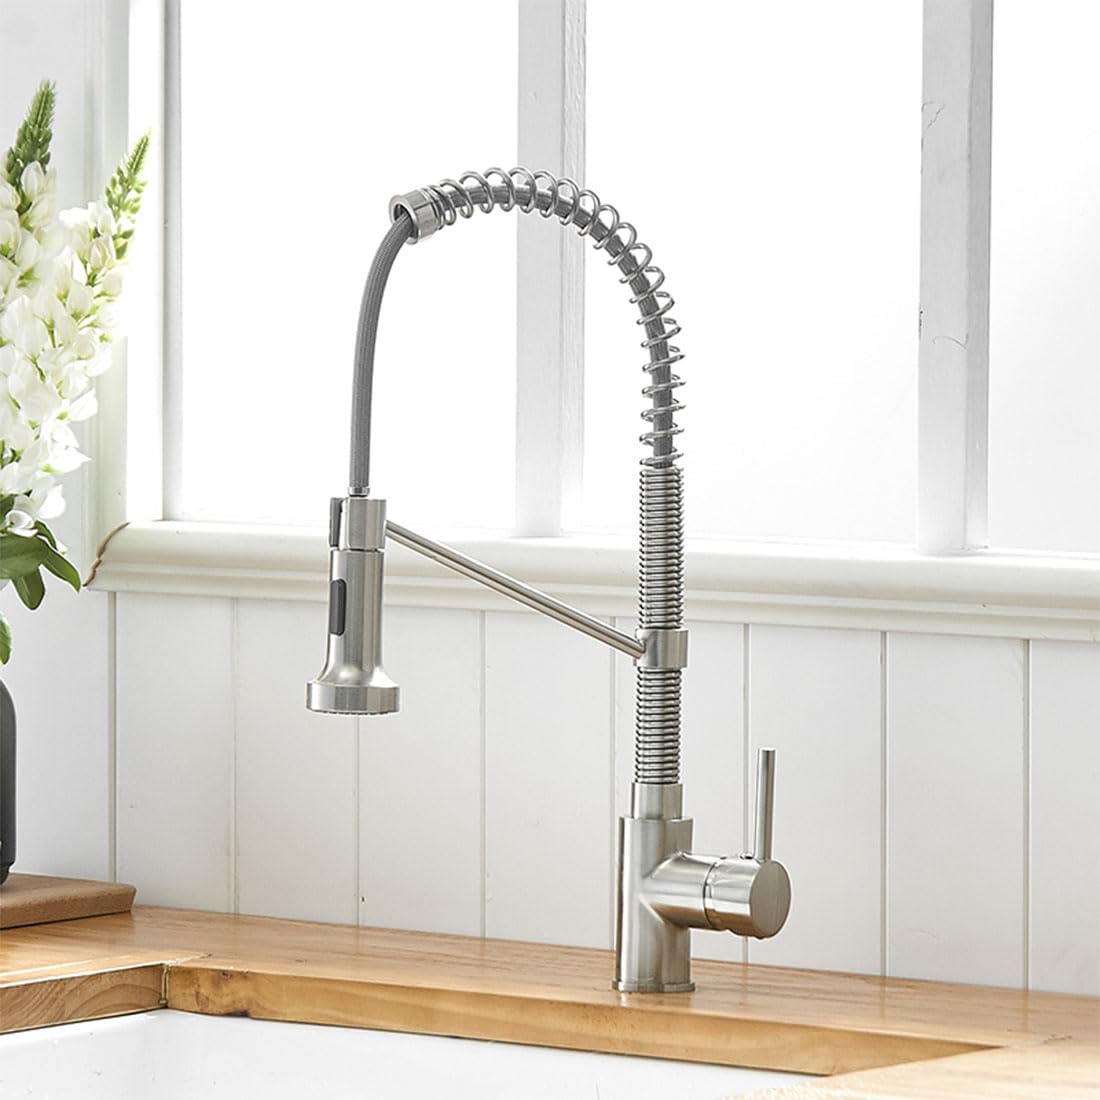 B Backline Brass Kitchen Sink Mixer Tap/Faucet Pull-Out, Dual Flow Sprays 360° Rotatable Kitchen (Brushed Nickle)